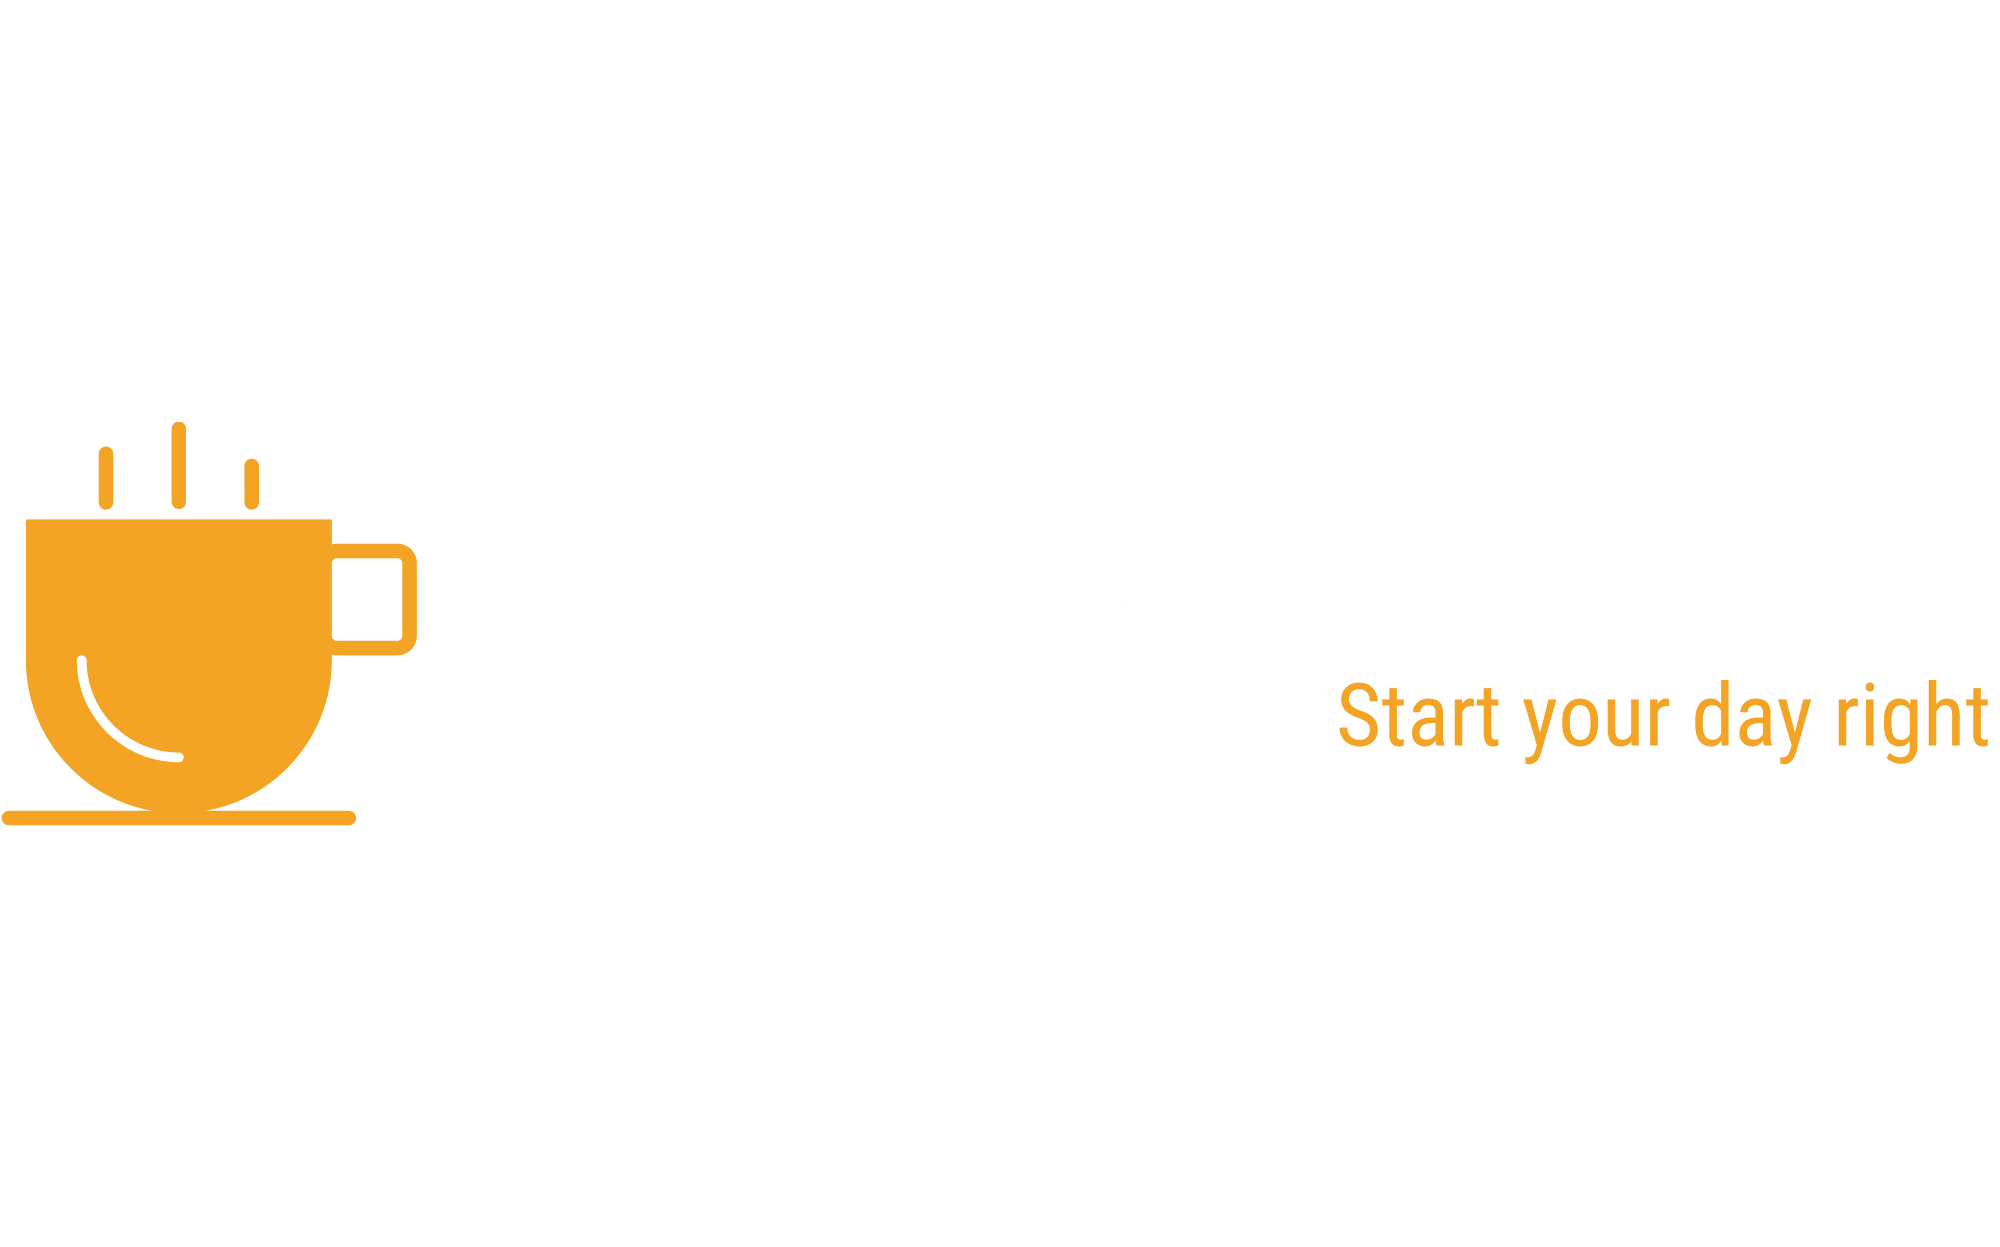 Image contains the logo of Sunset Cafe